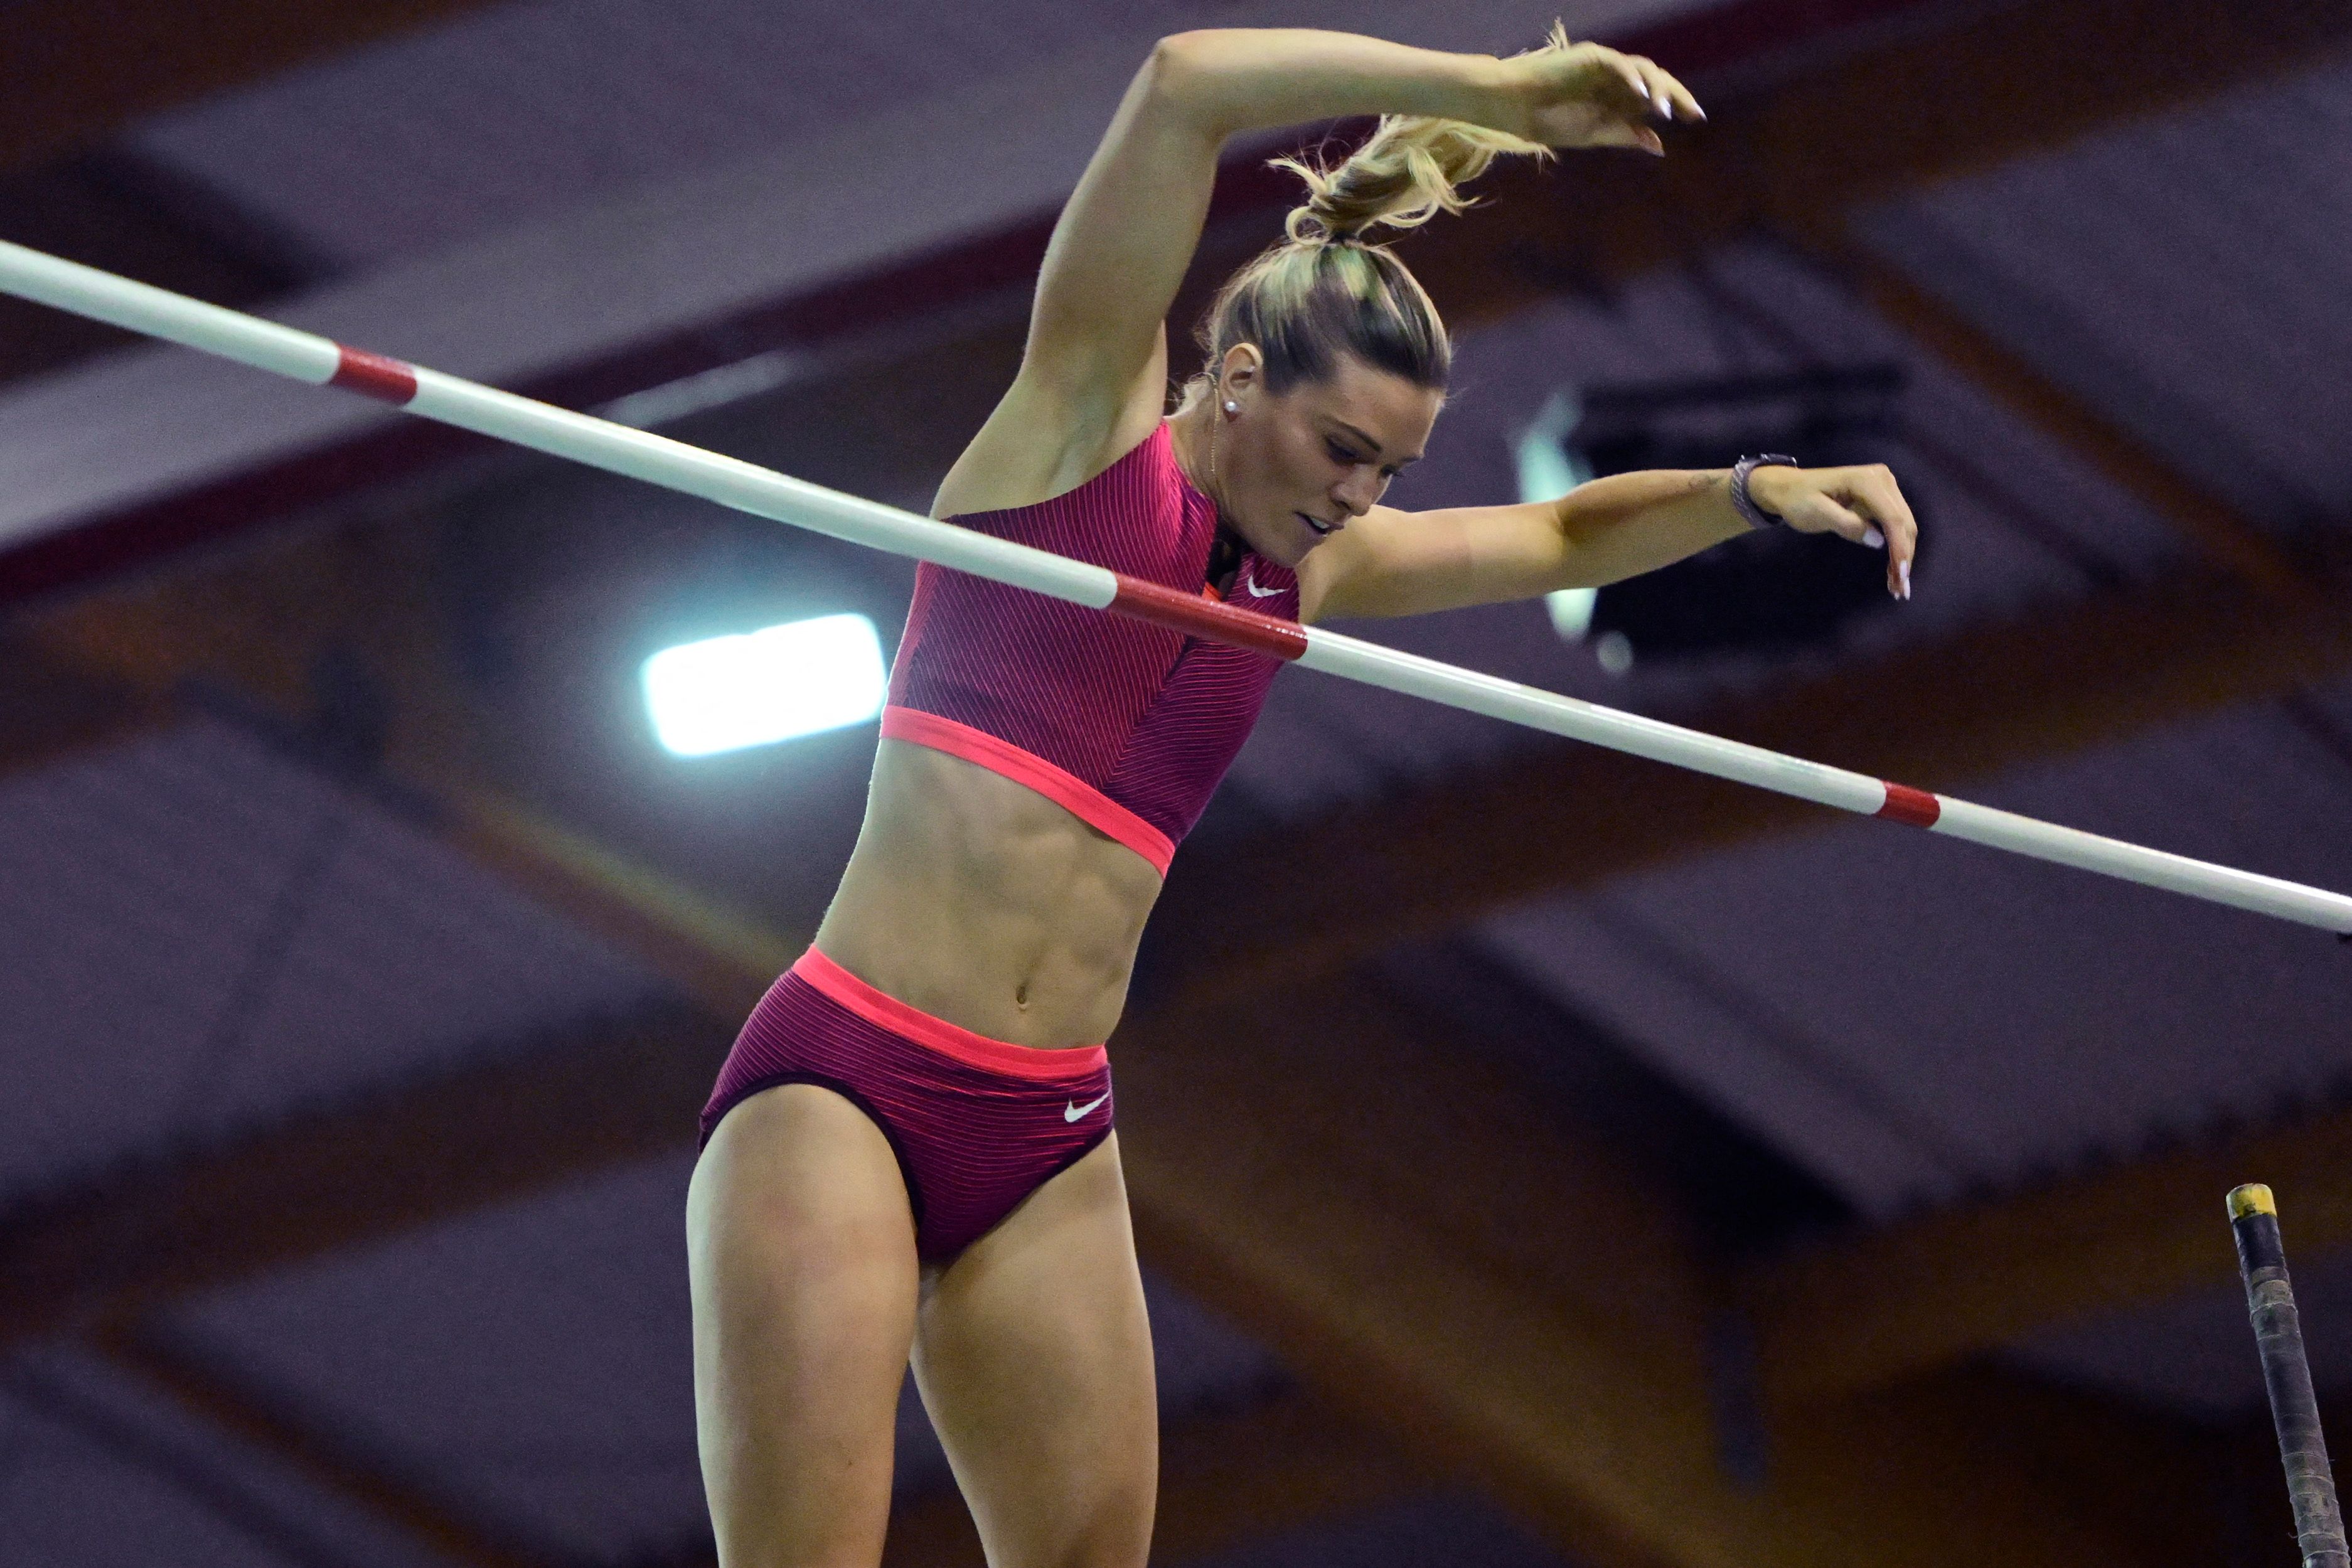 Canadian pole vaulter Alysha Newman finding form in a different